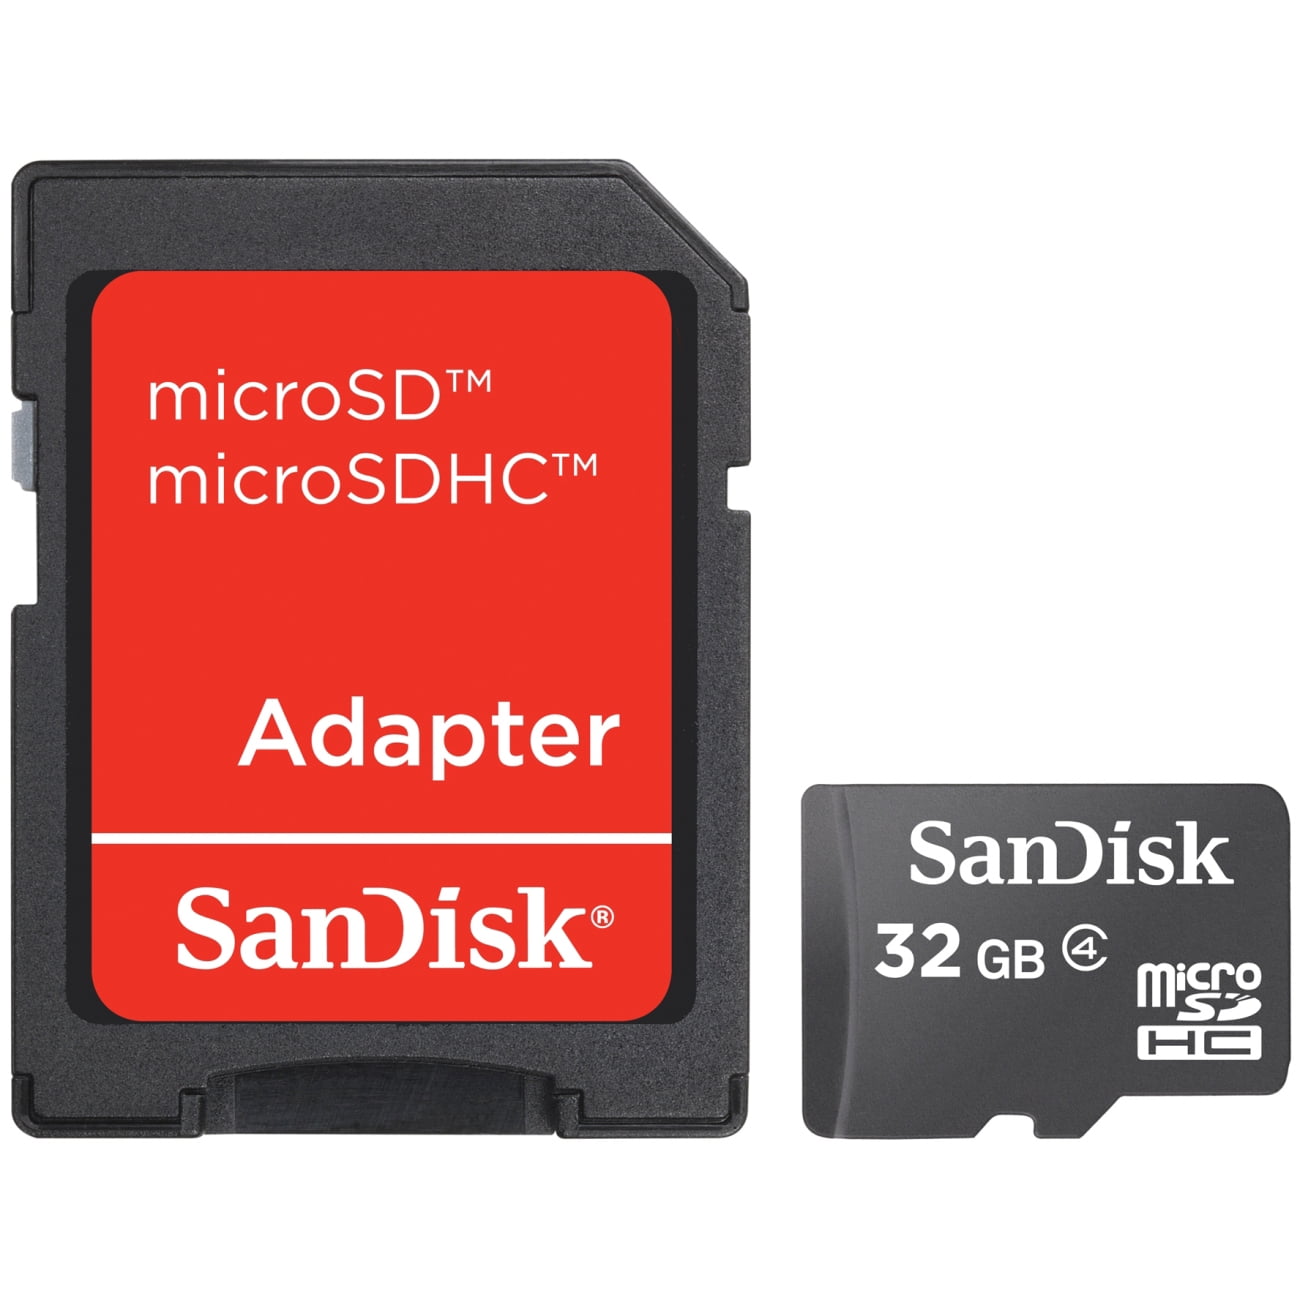 SanDisk 32GB microSDHC Flash Memory Card With Adapter - C4, Full HD, Micro  SD Card - SDSDQM-032G-B35A